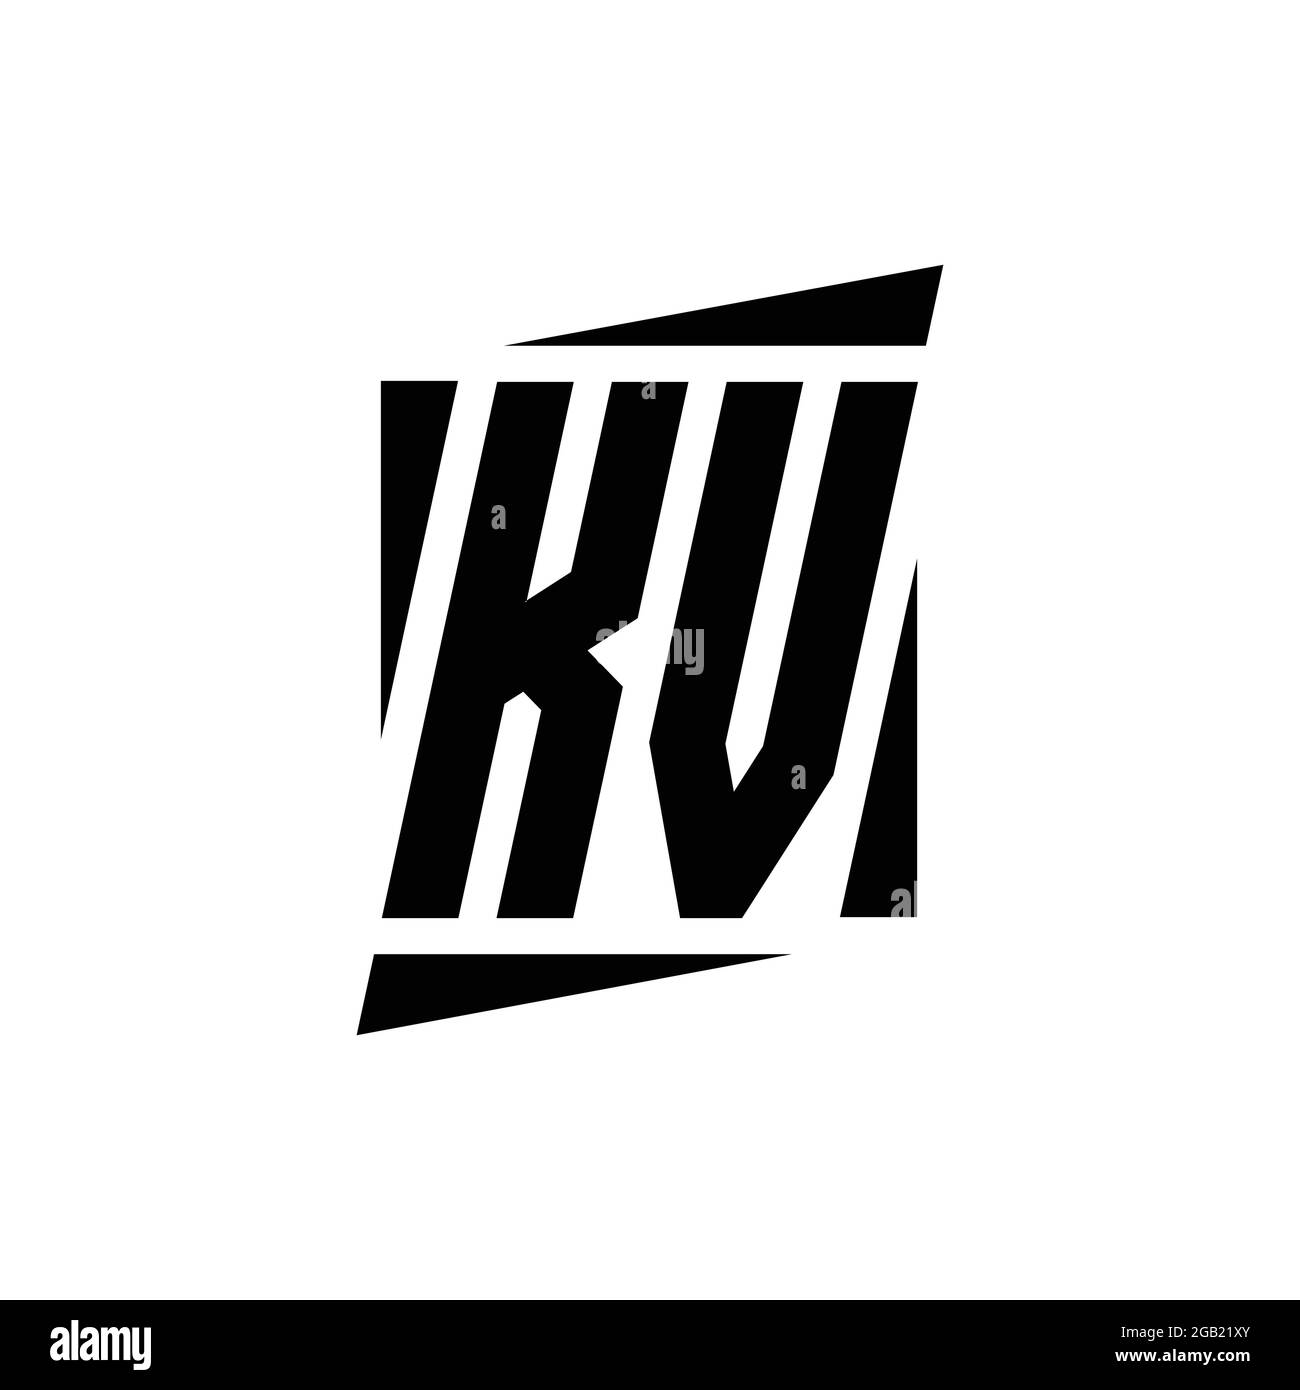 KV Logo monogram with modern style concept design template isolated on ...